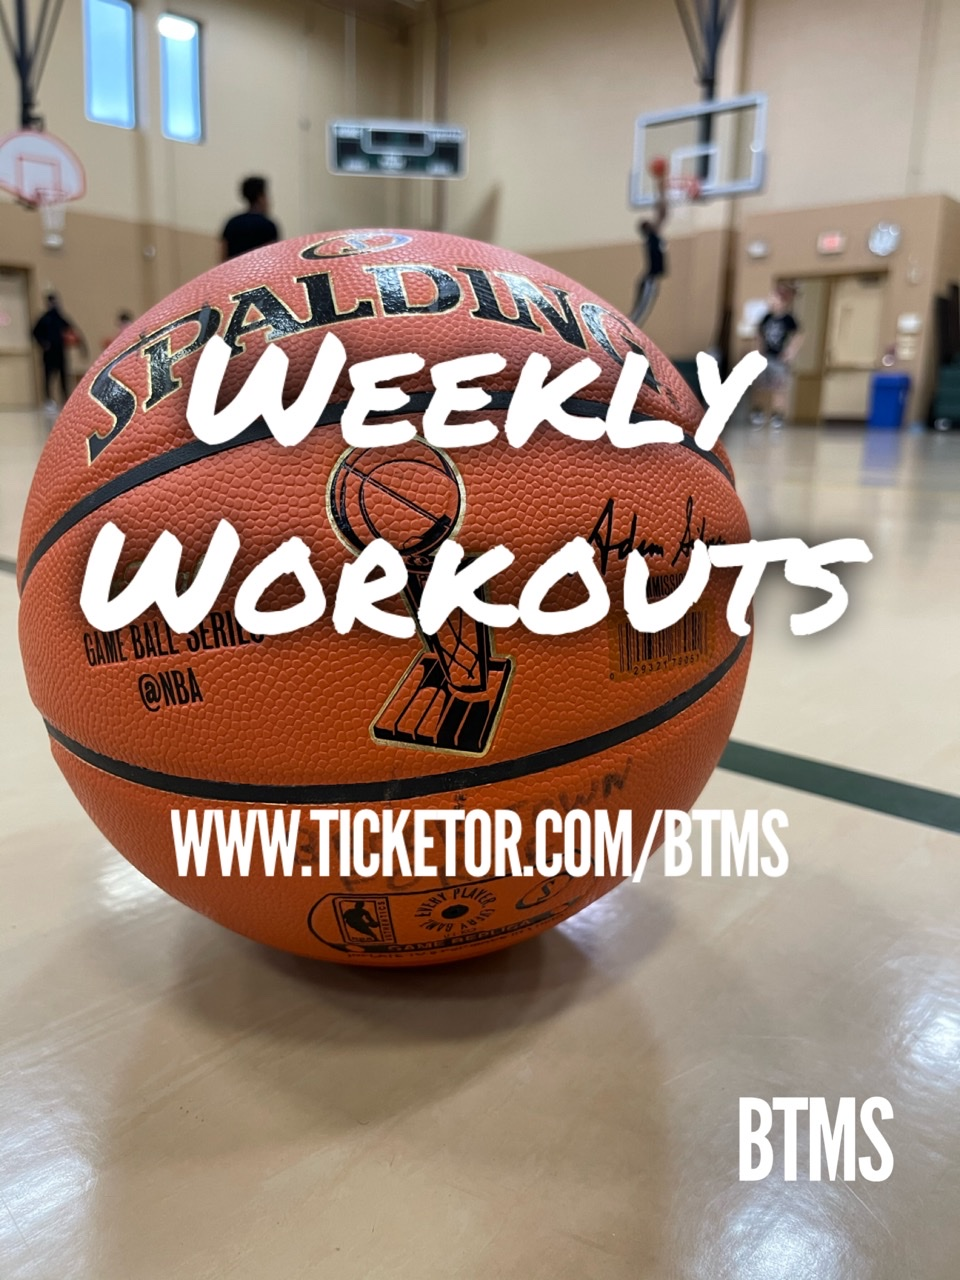 Weekly Workouts Basketball workout for skills, knowledge and basketball conditioning on dic. 31, 00:00@Oak Lawn Pavilion - Buy tickets and Get information on BTMS LLC 